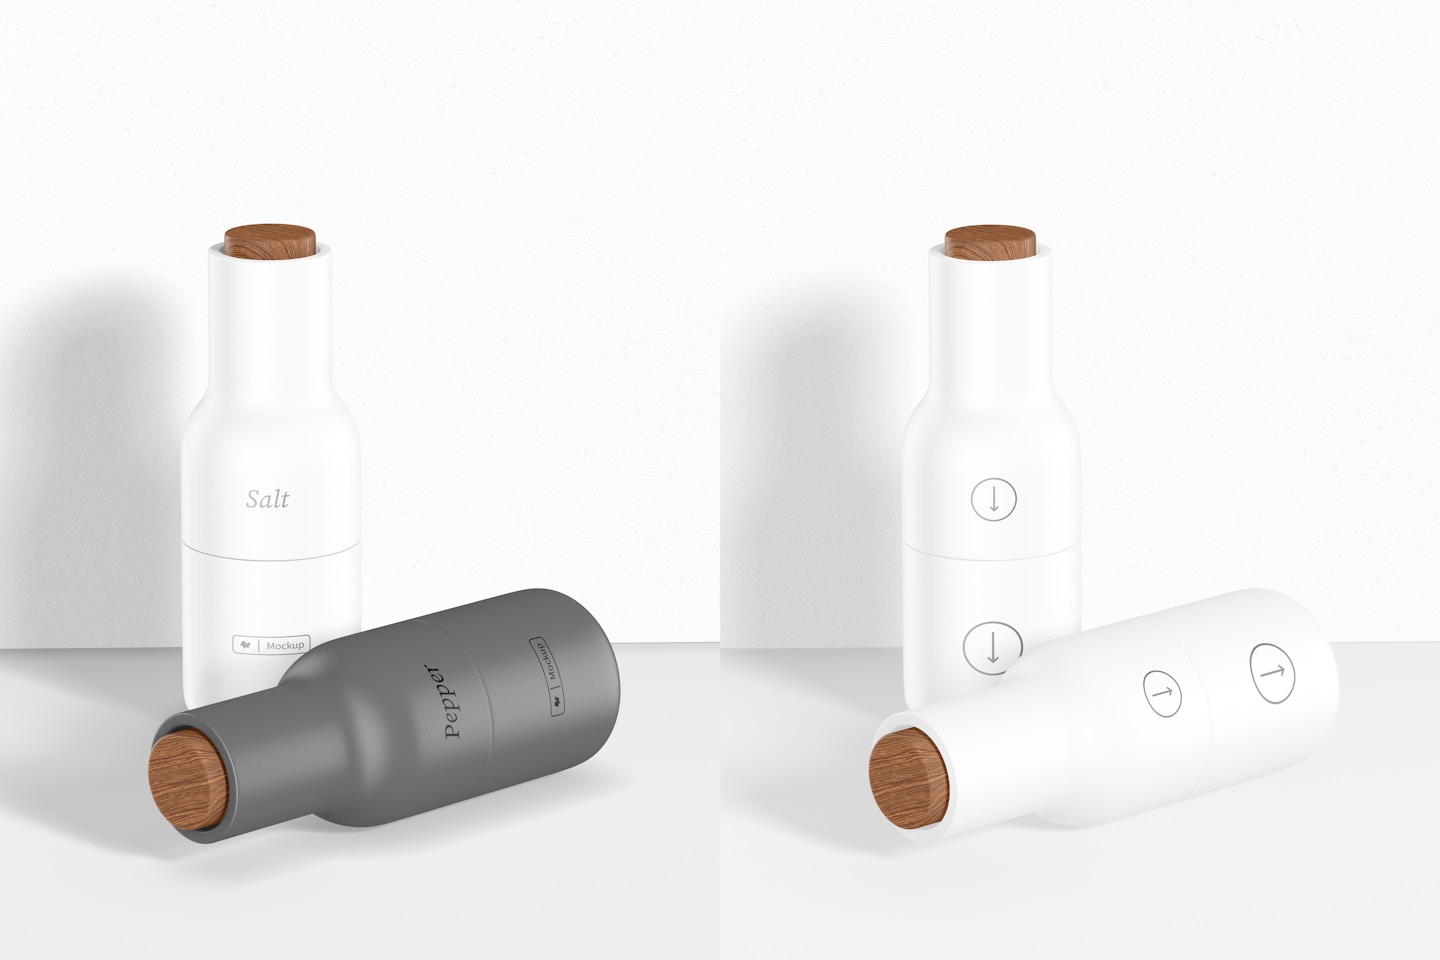 Salt and Pepper Grinder Mockup, Standing and Dropped